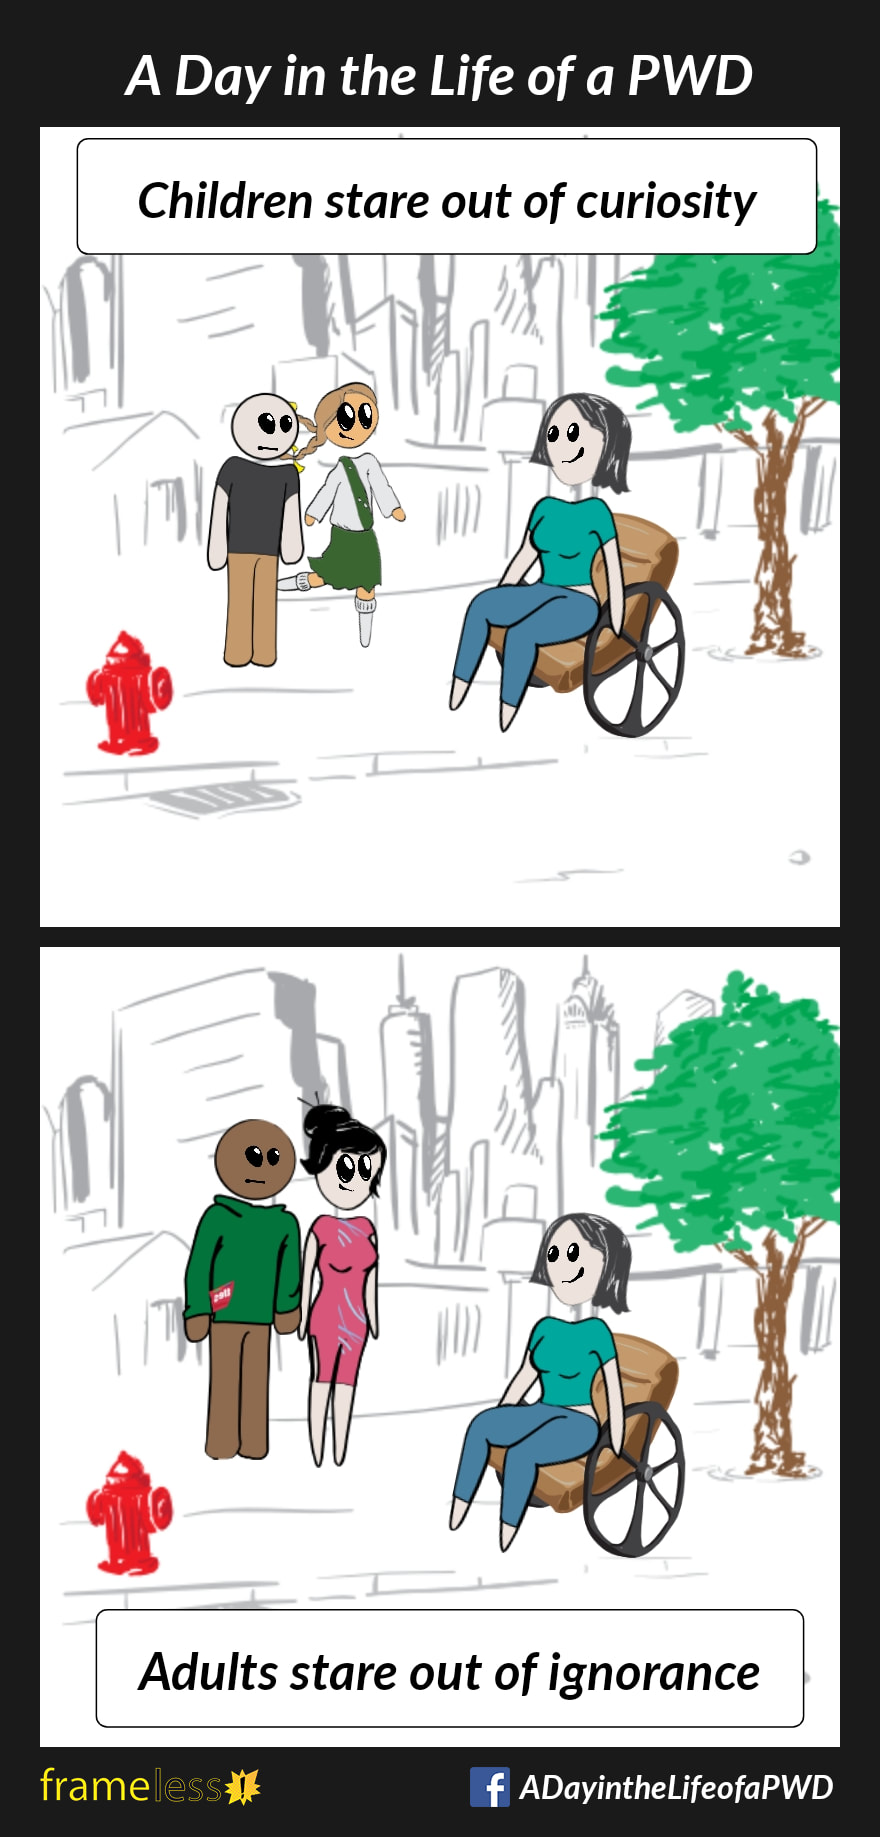 COMIC STRIP 
A Day in the Life of a PWD (Person With a Disability) 

Frame 1:
CAPTION: Children stare out of curiosity 
A woman in a wheelchair is traveling down a sidewalk. A pair of children stare at her.

Frame 2:
CAPTION: Adults stare out of ignorance 
The woman is traveling down a sidewalk. A pair of adults stare at her.